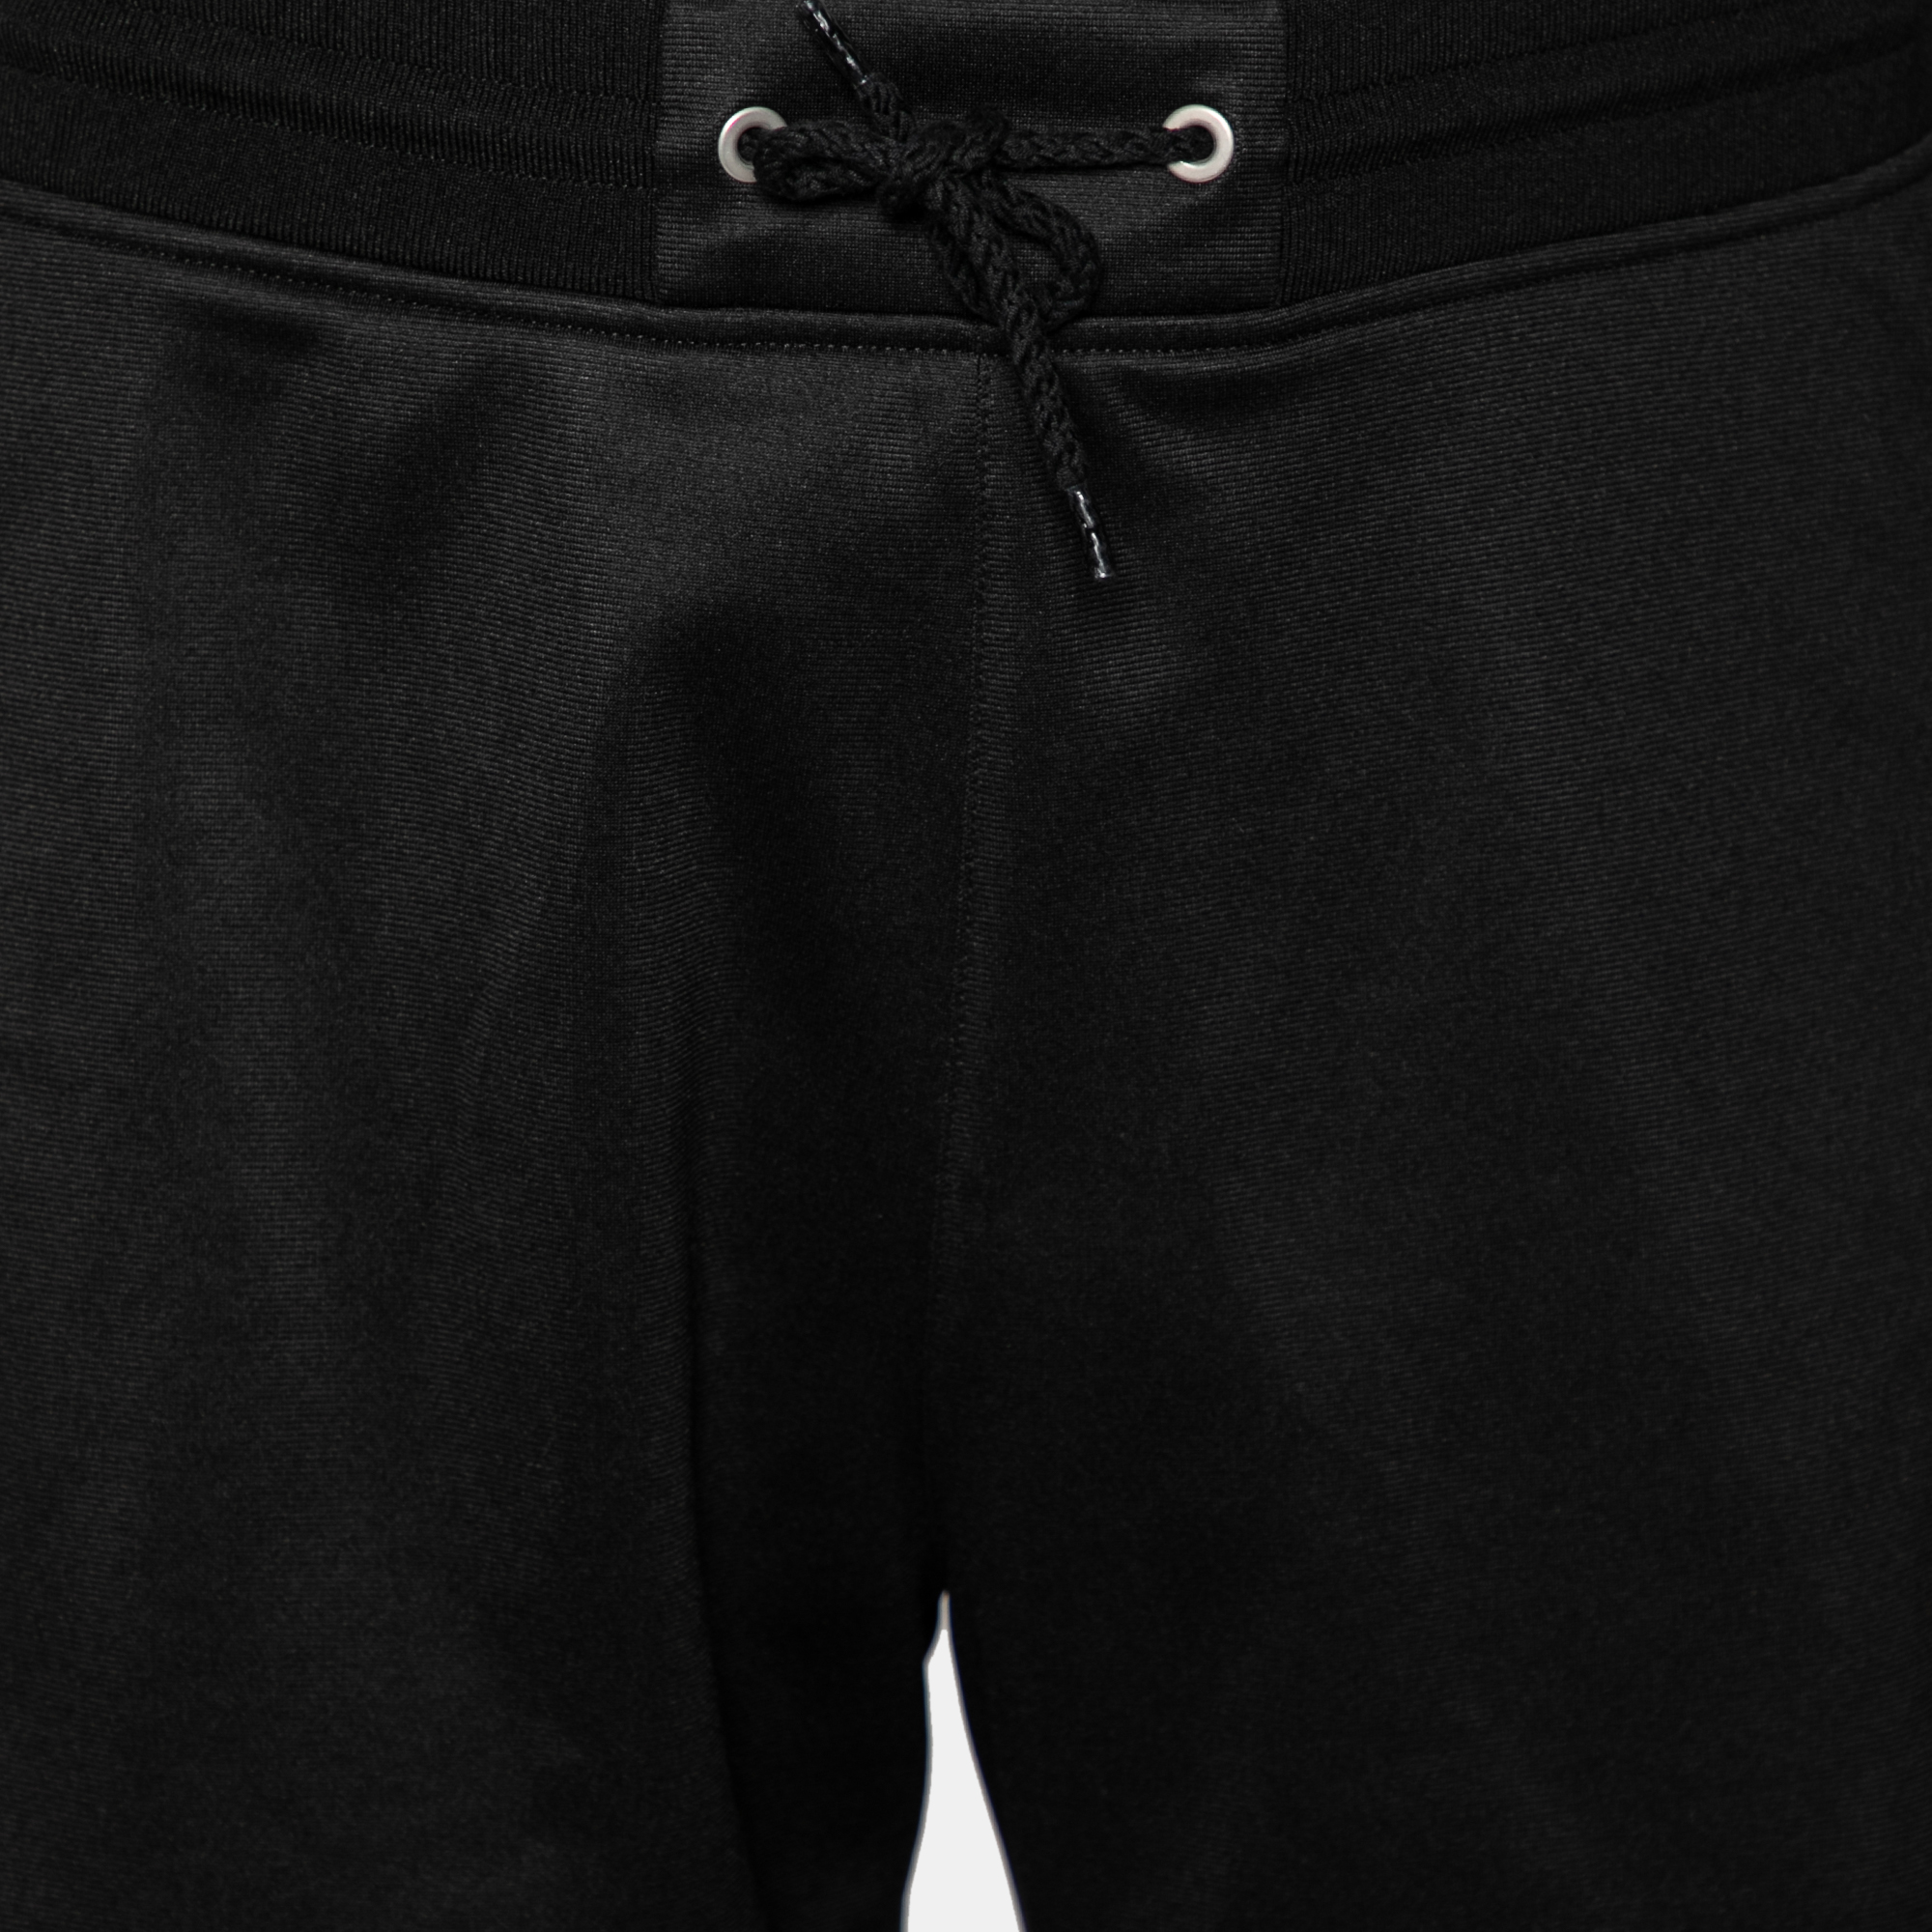 Givenchy Black Jersey Logo Tape Trimmed Shorts M